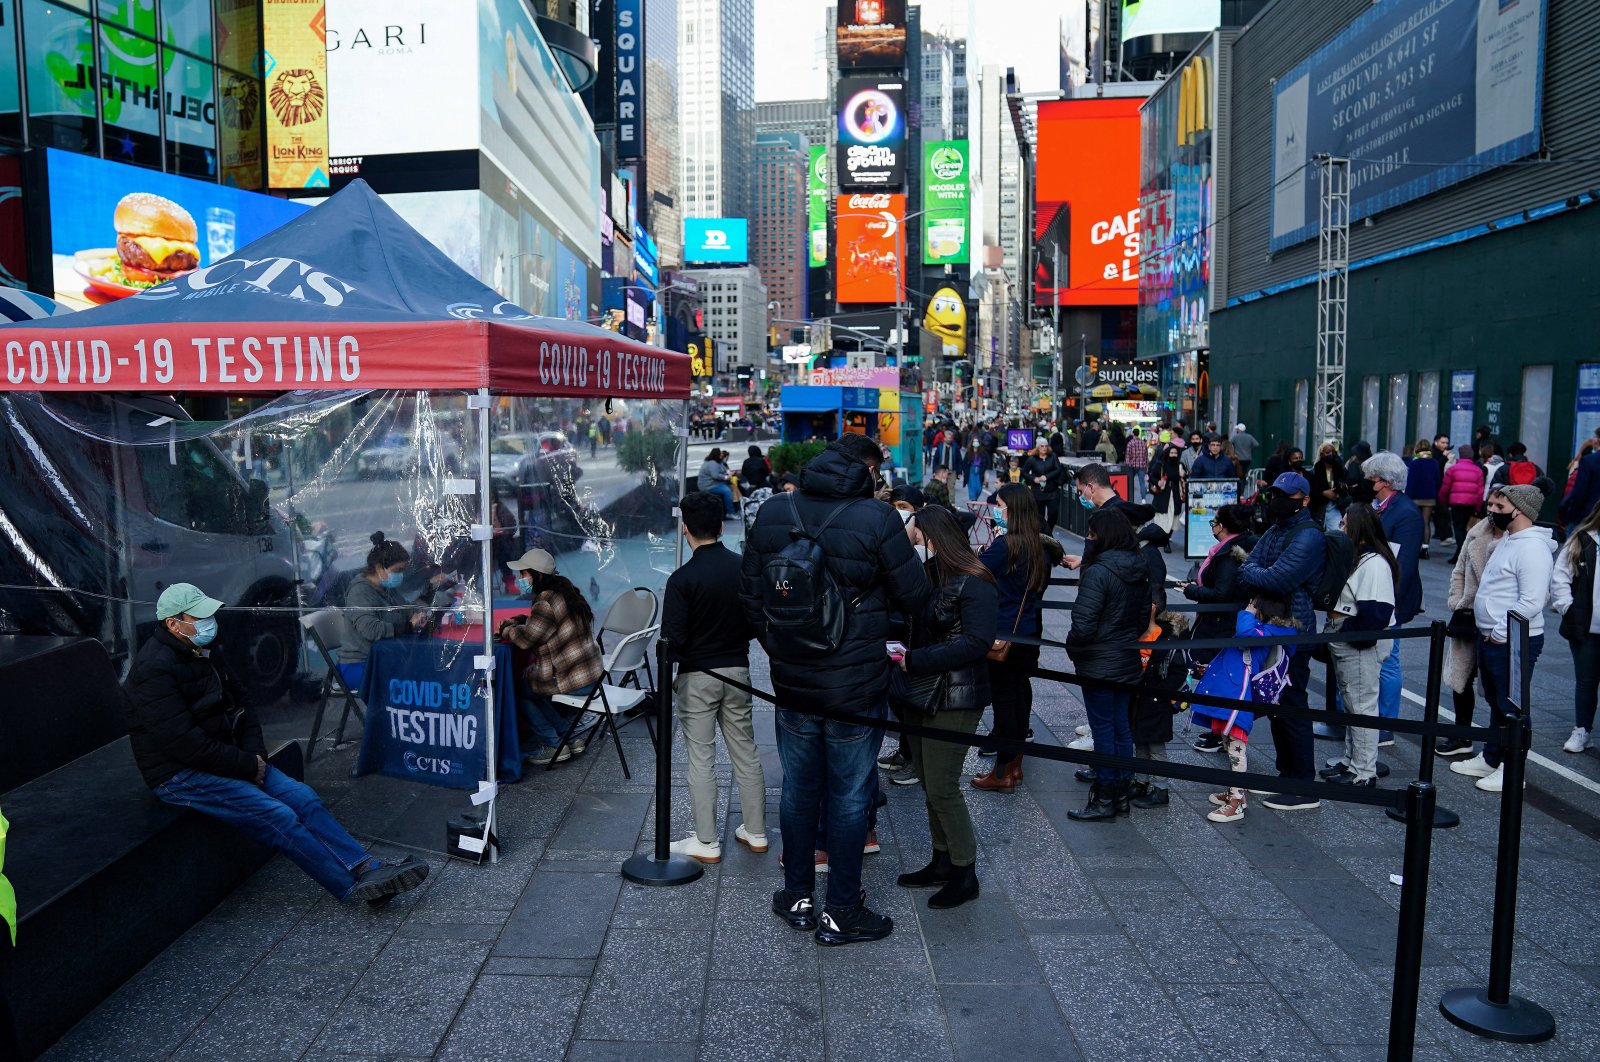 People line up at a COVID-19 testing site in Times Square in the Manhattan borough of New York City, New York, U.S., Dec. 17, 2021. (Reuters Photo)